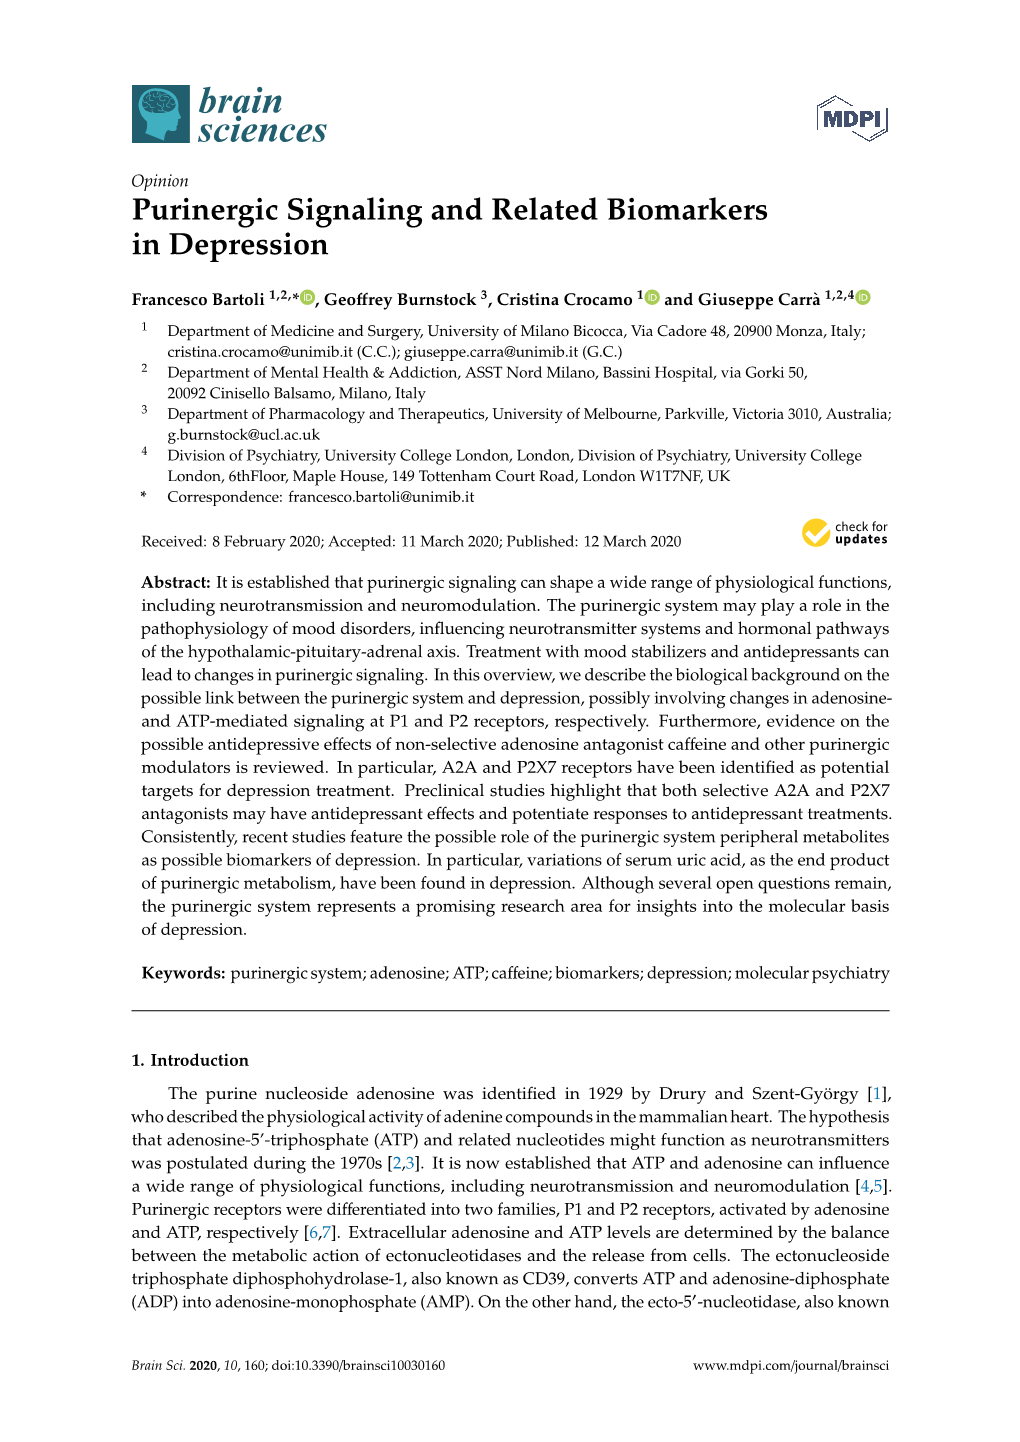 Purinergic Signaling and Related Biomarkers in Depression